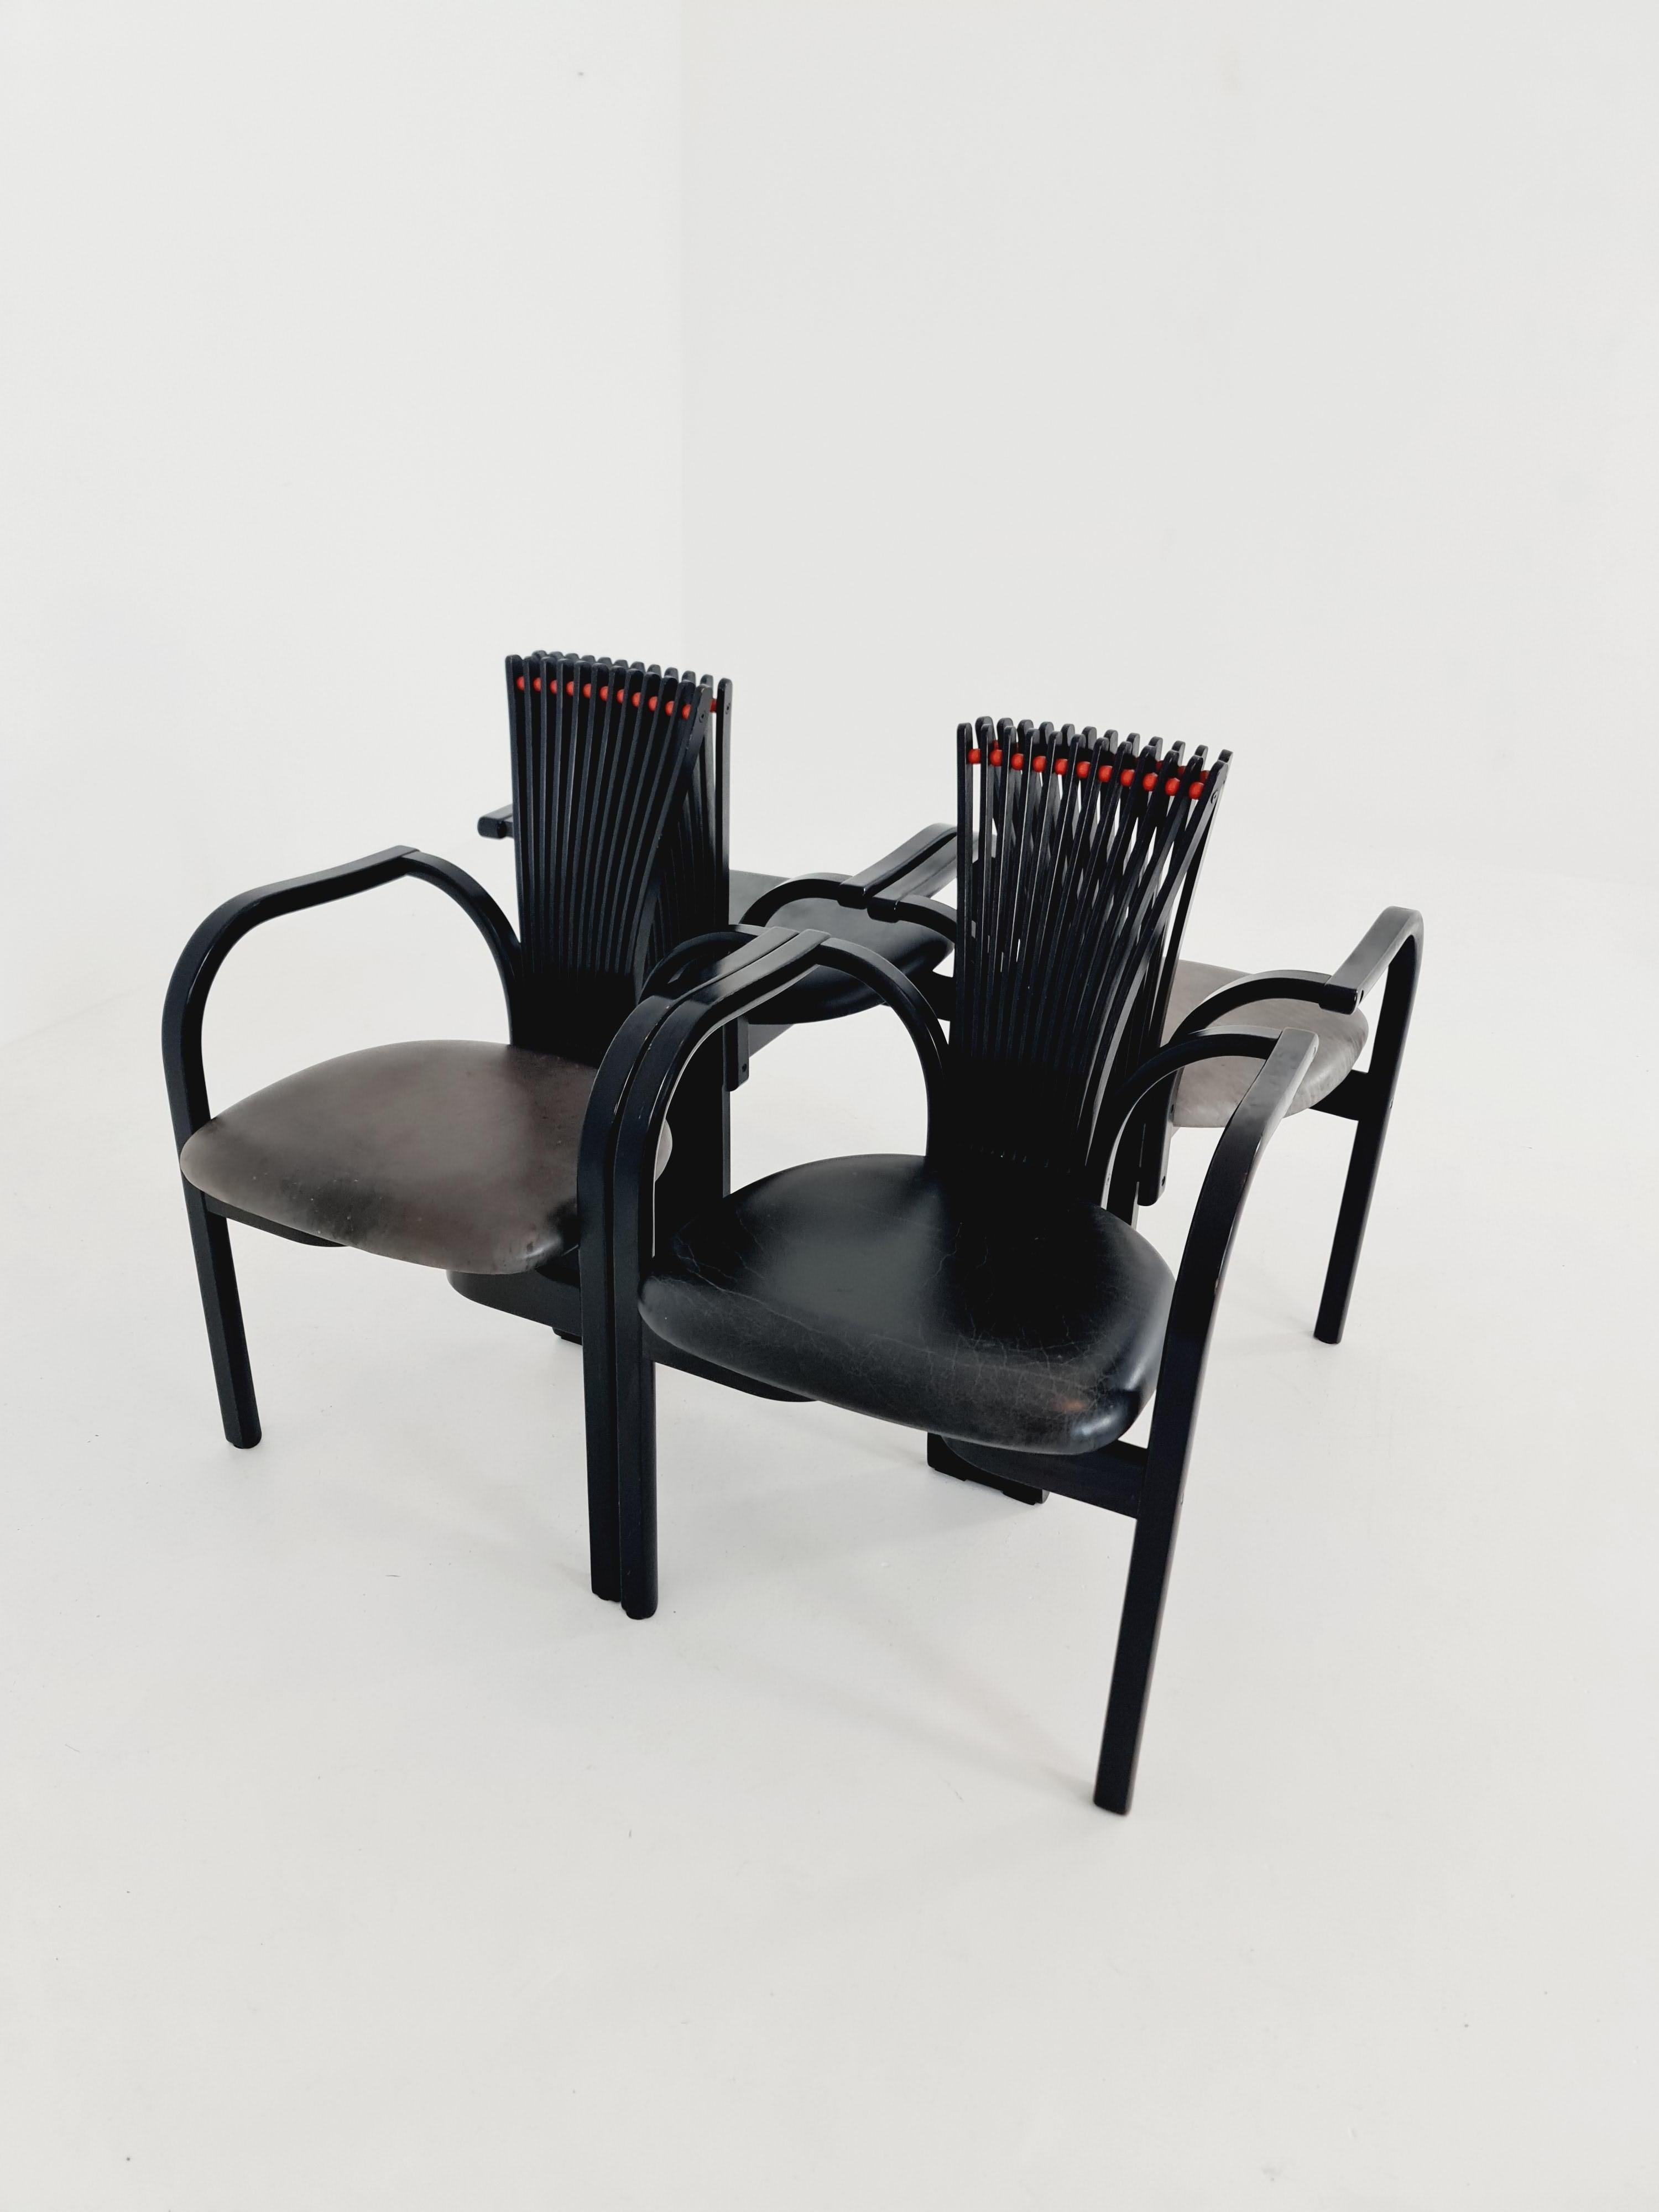 4 Totem dining chairs by Torstein Nilsen for Westnofa, Italian design table For Sale 12